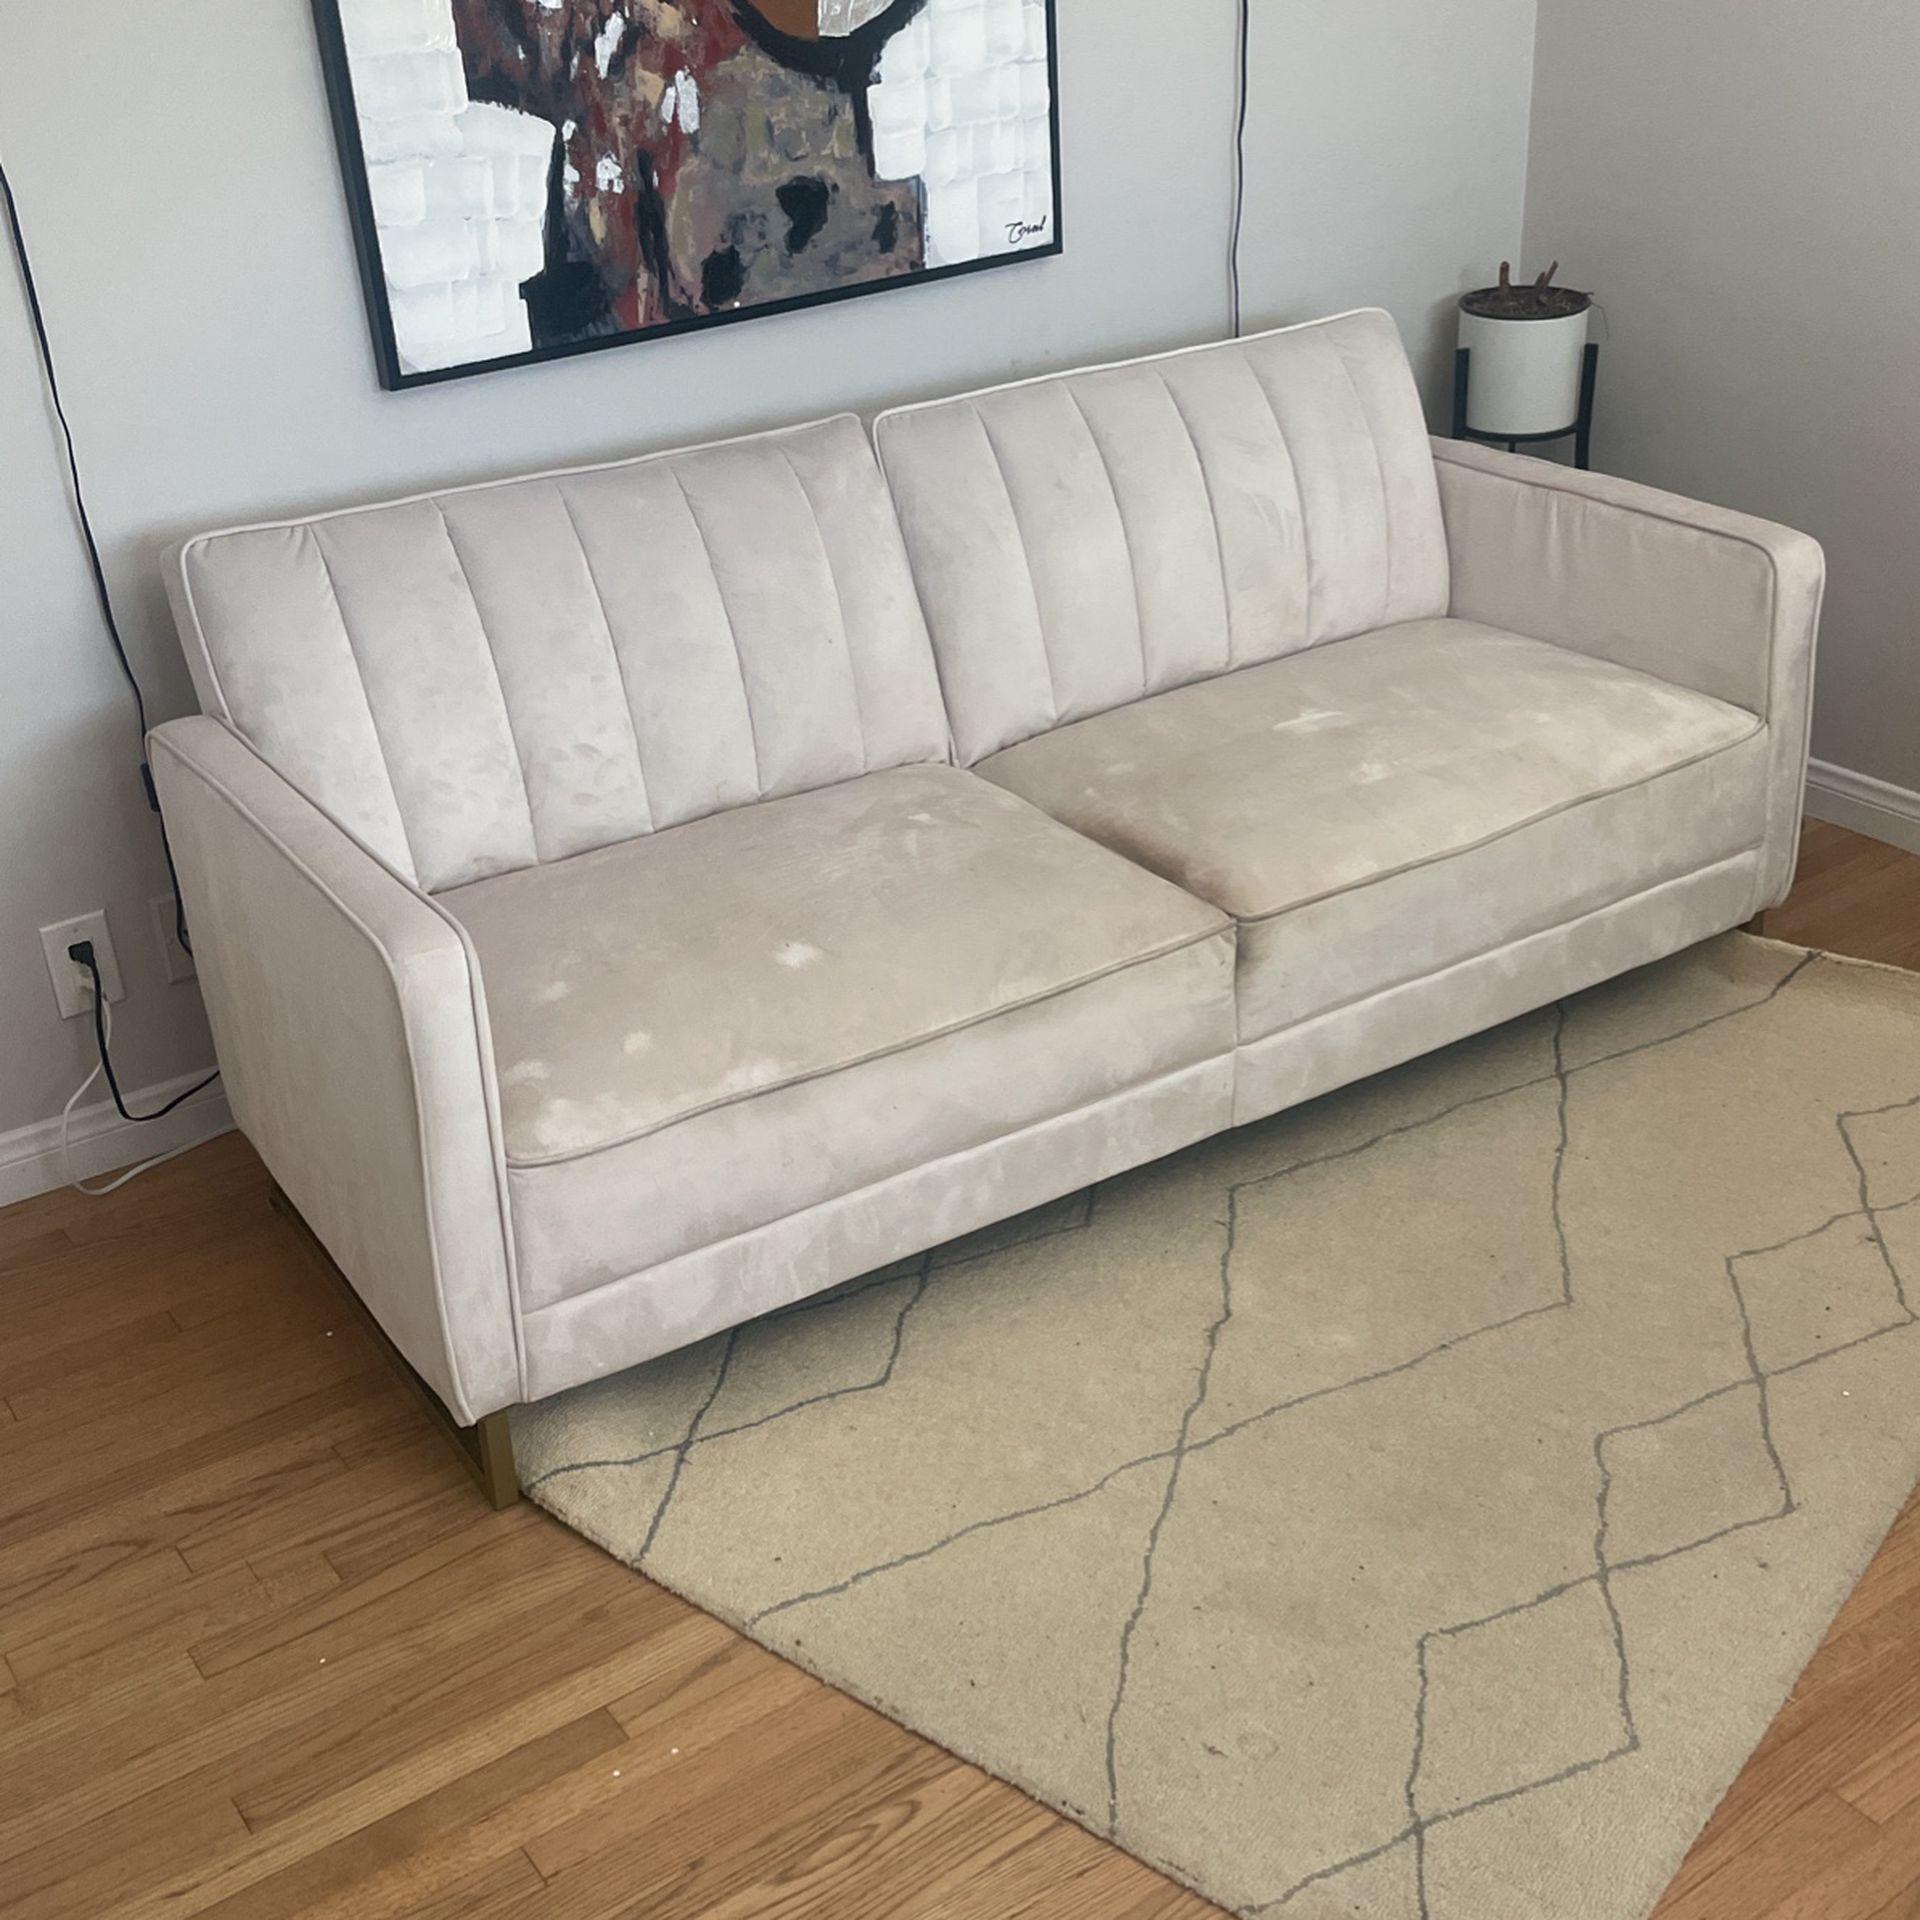 Couch / Fold Out Bed 